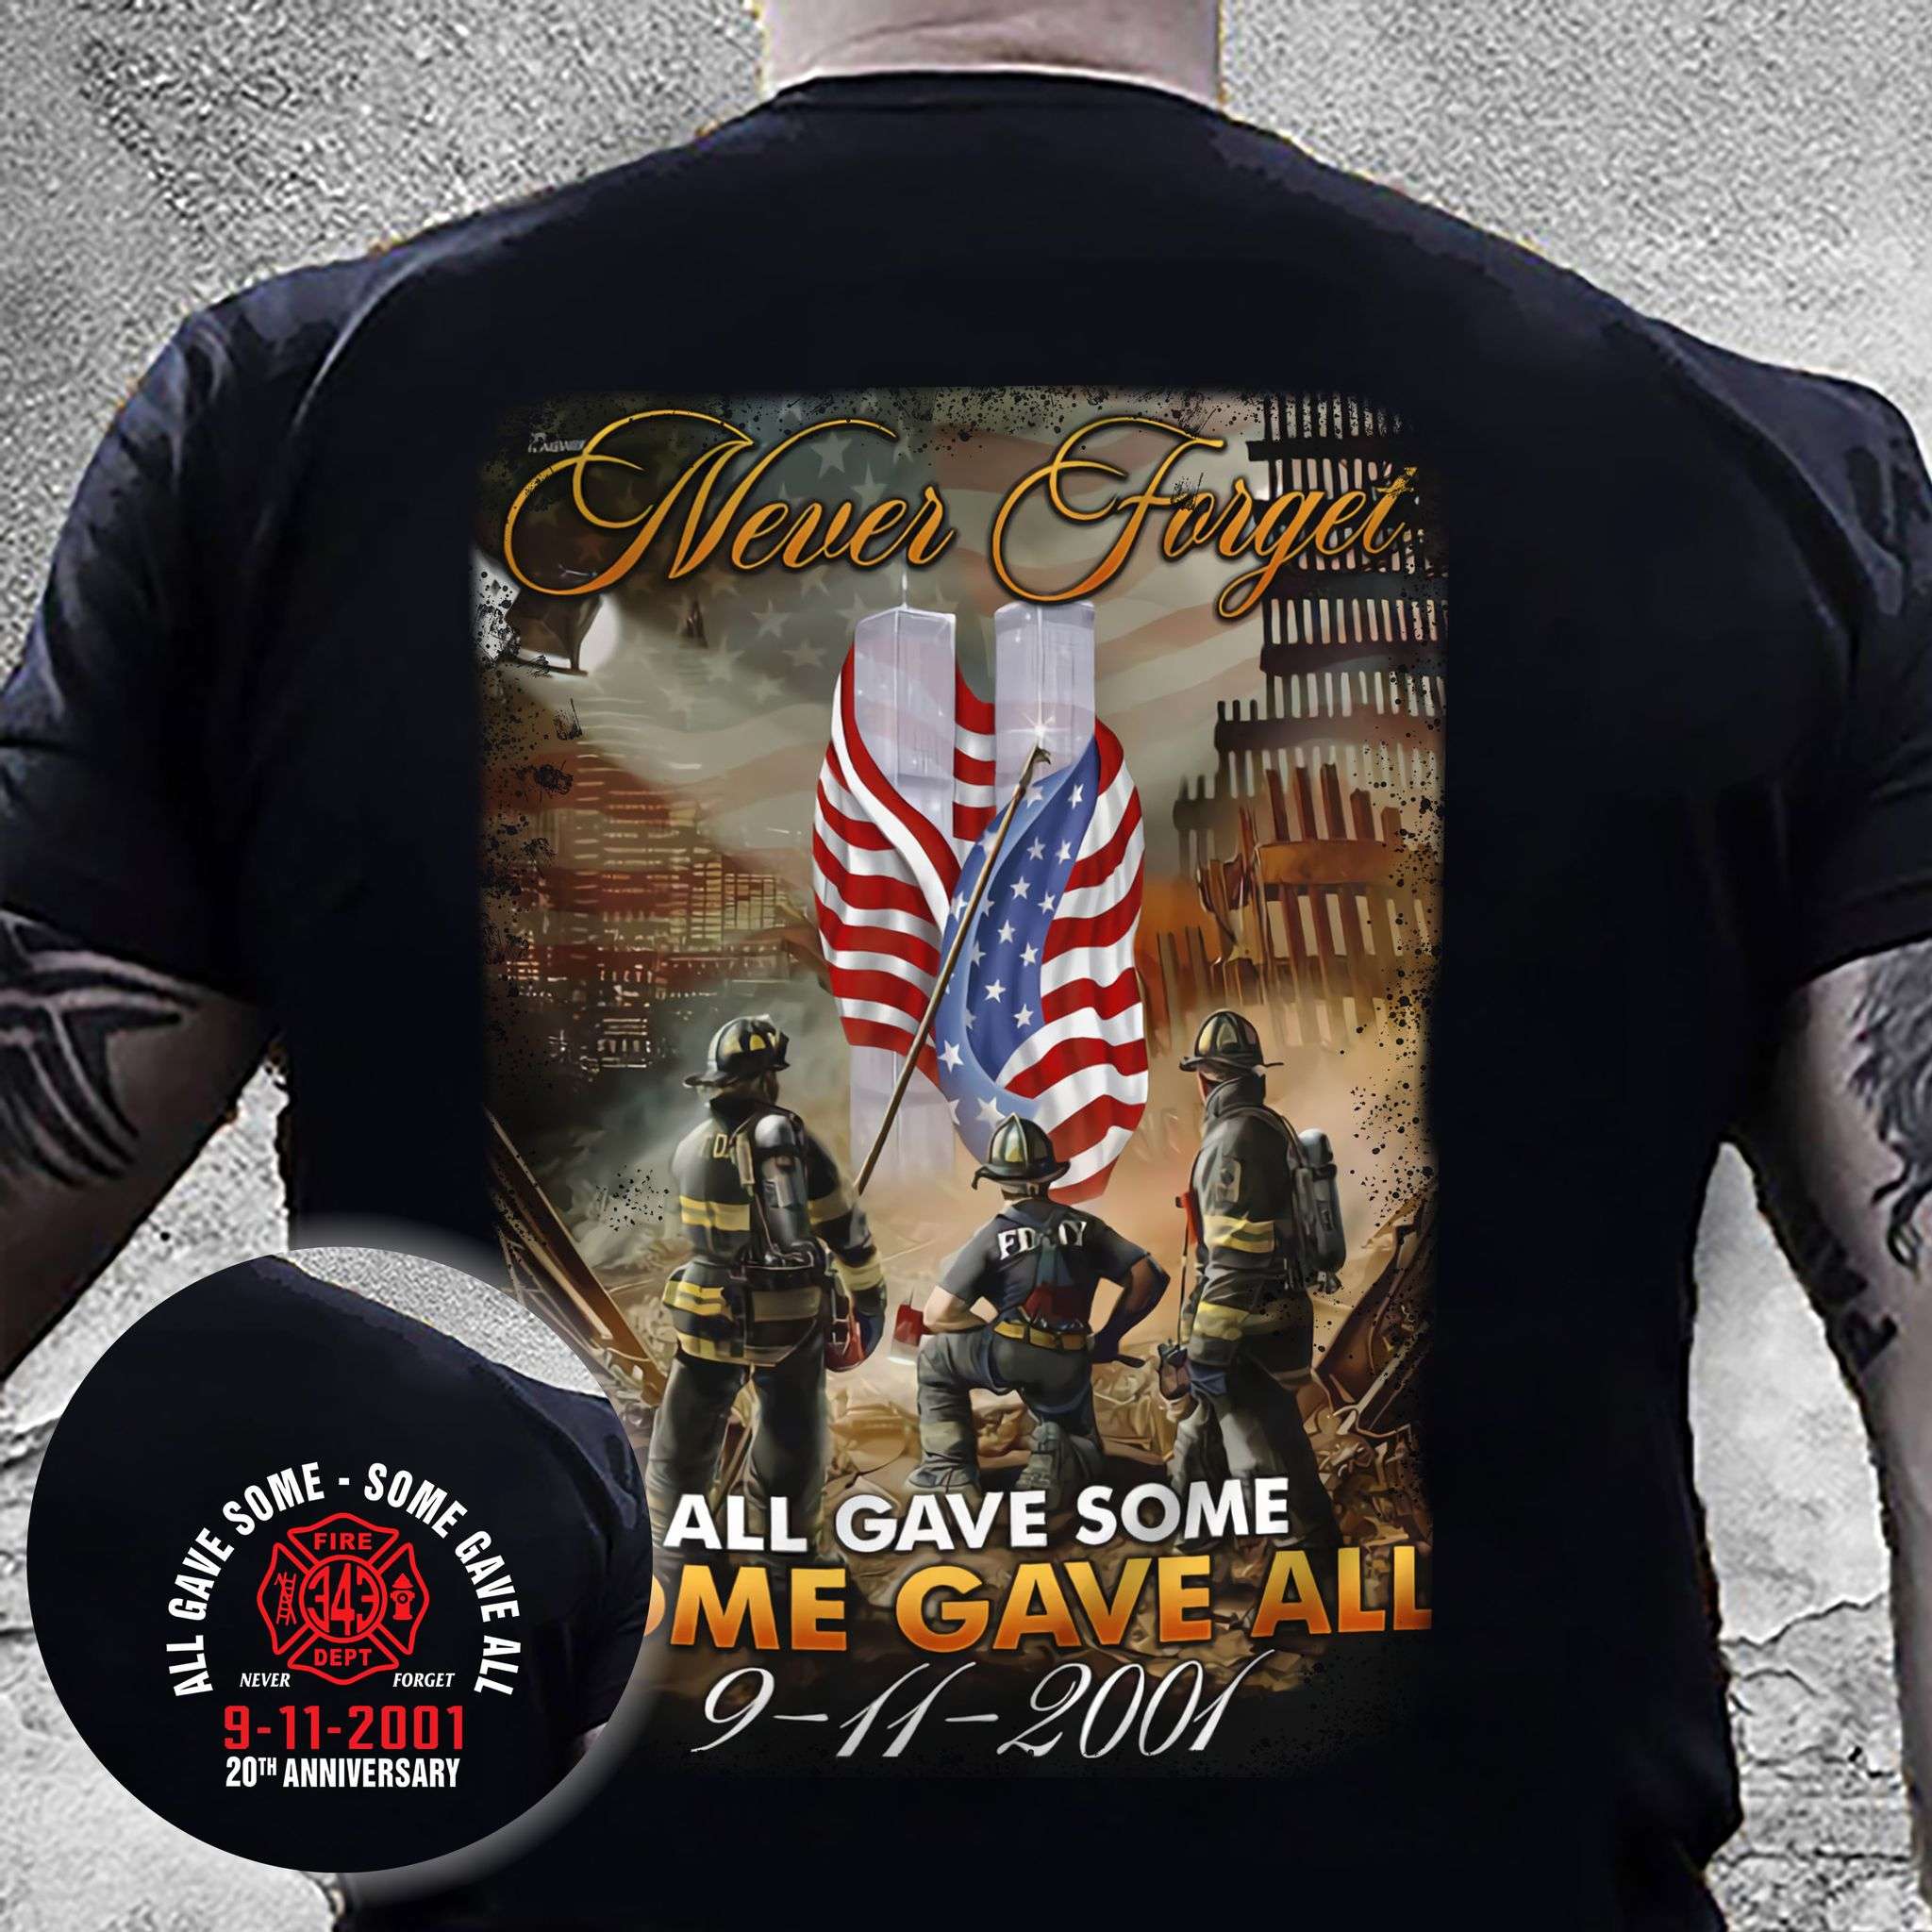 Never forget all gave some me gave all - September 11, America terrorist attack anniversary